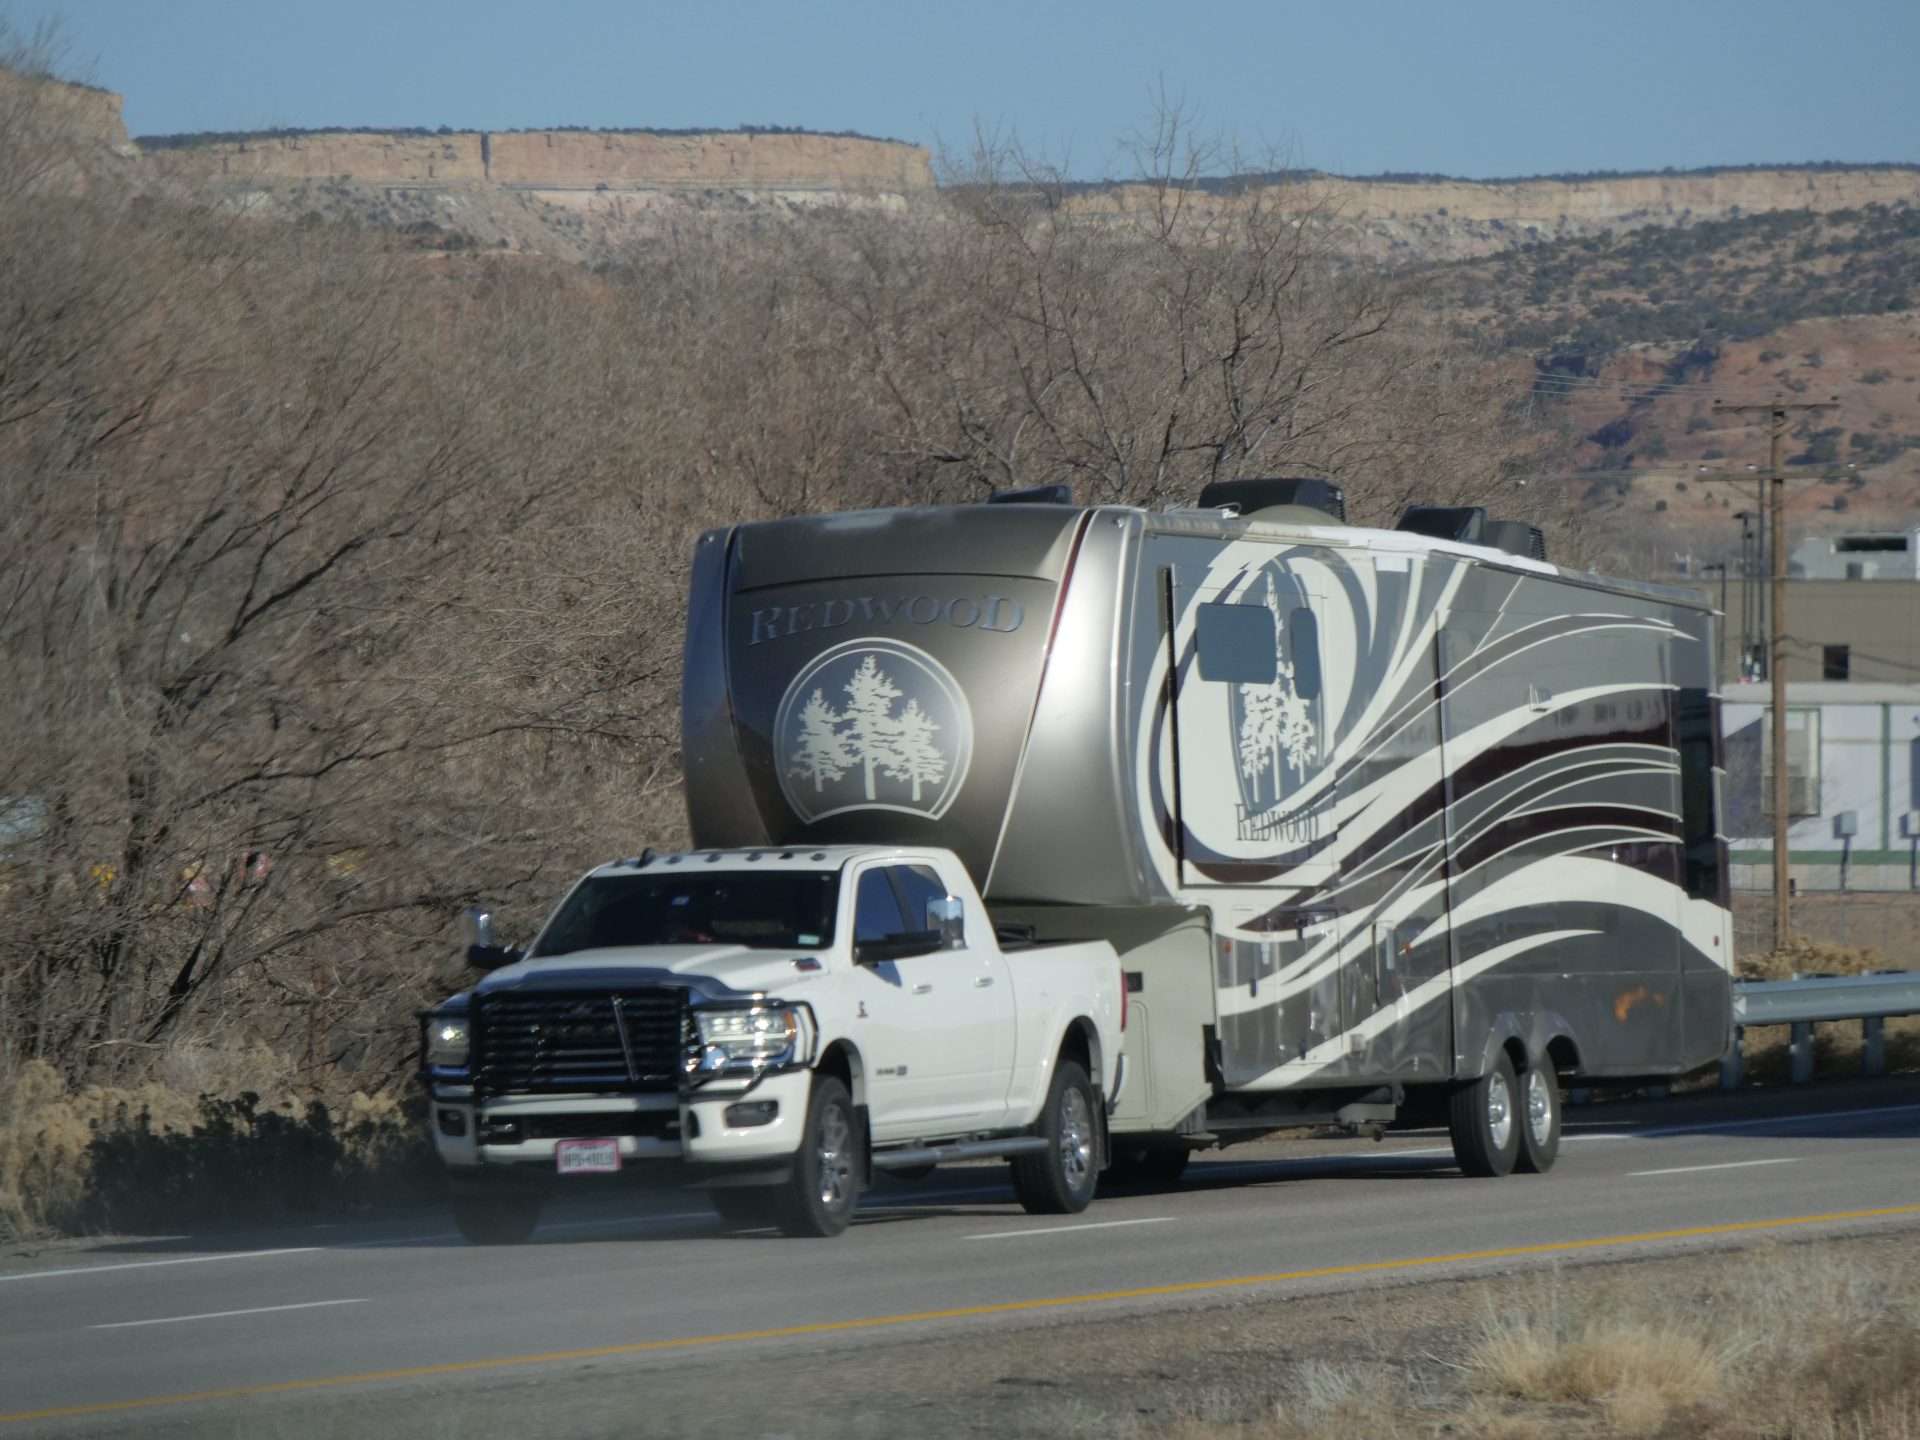 Truck towing fifth wheel camper.